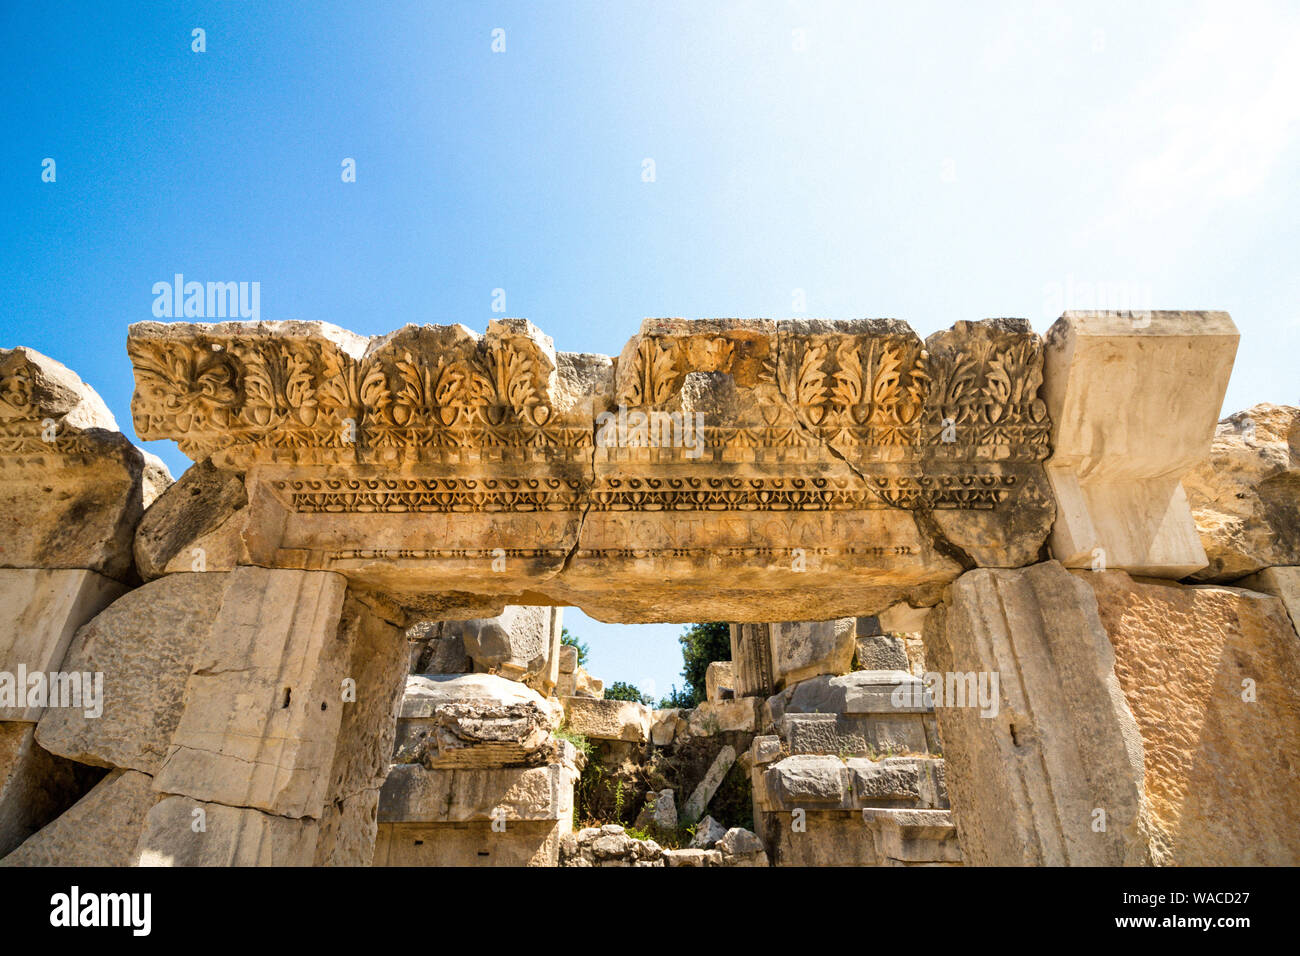 The ruins of the ancient city and amphitheater. The building was built by the ancient Romans in the territory of modern Turkey. Stock Photo